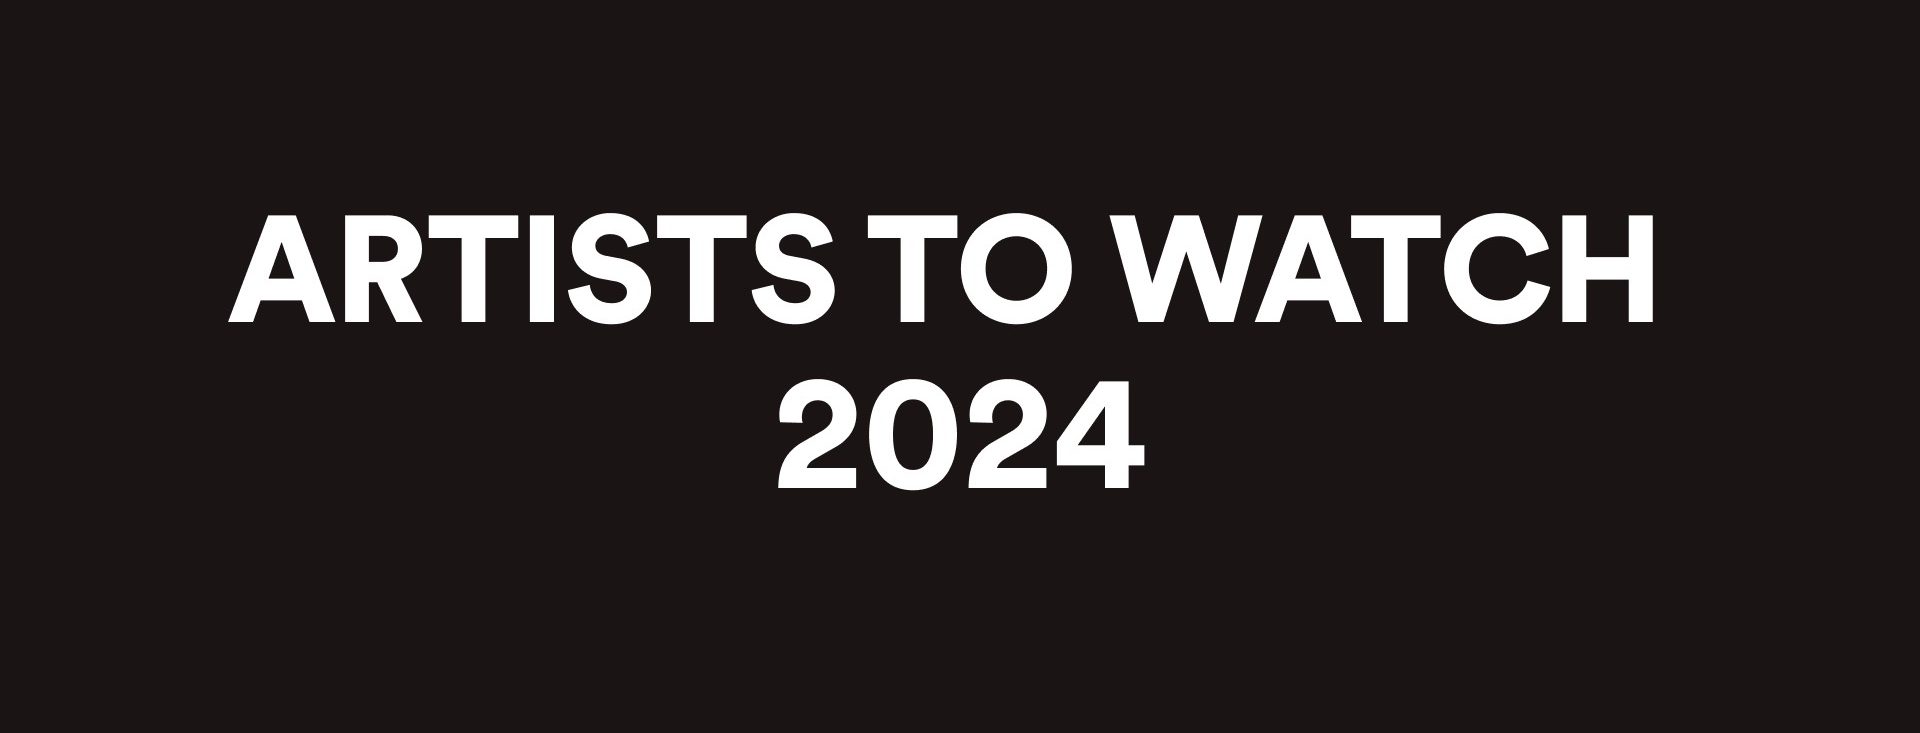 Spotify’s Artists To Watch 2024 – 90 artists predicted to go big